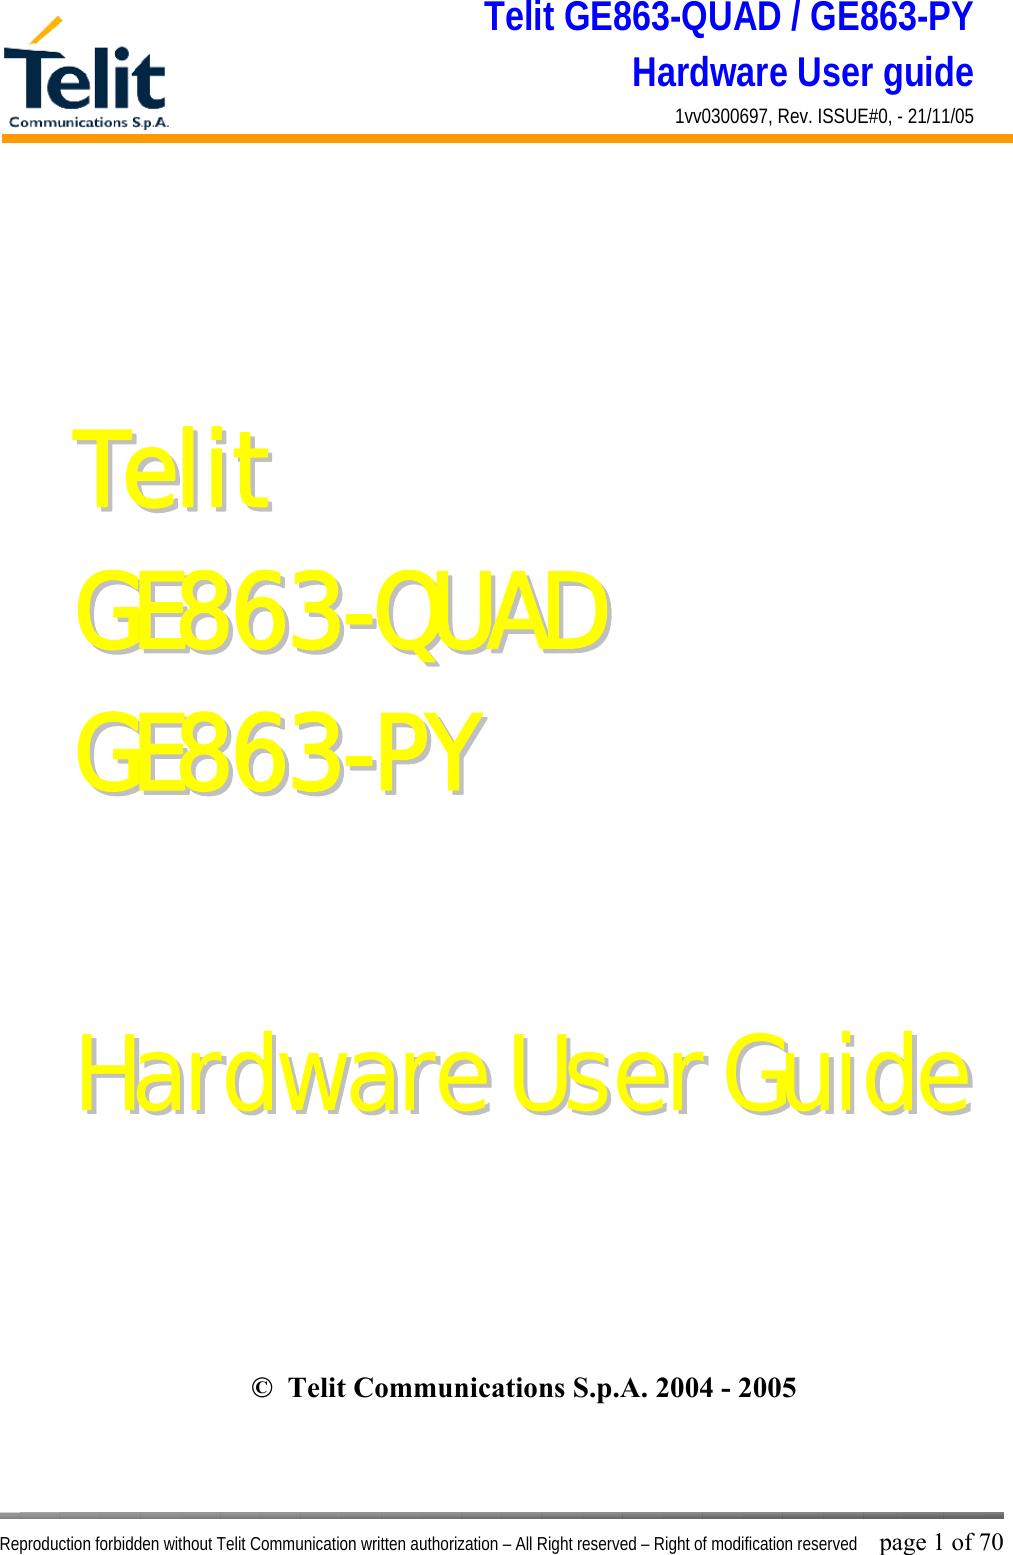 Telit GE863-QUAD / GE863-PY Hardware User guide 1vv0300697, Rev. ISSUE#0, - 21/11/05    Reproduction forbidden without Telit Communication written authorization – All Right reserved – Right of modification reserved page 1 of 70 TTeelliitt  GGEE886633--QQUUAADD  GGEE886633--PPYY      HHaarrddwwaarree  UUsseerr  GGuuiiddee ©  Telit Communications S.p.A. 2004 - 2005  